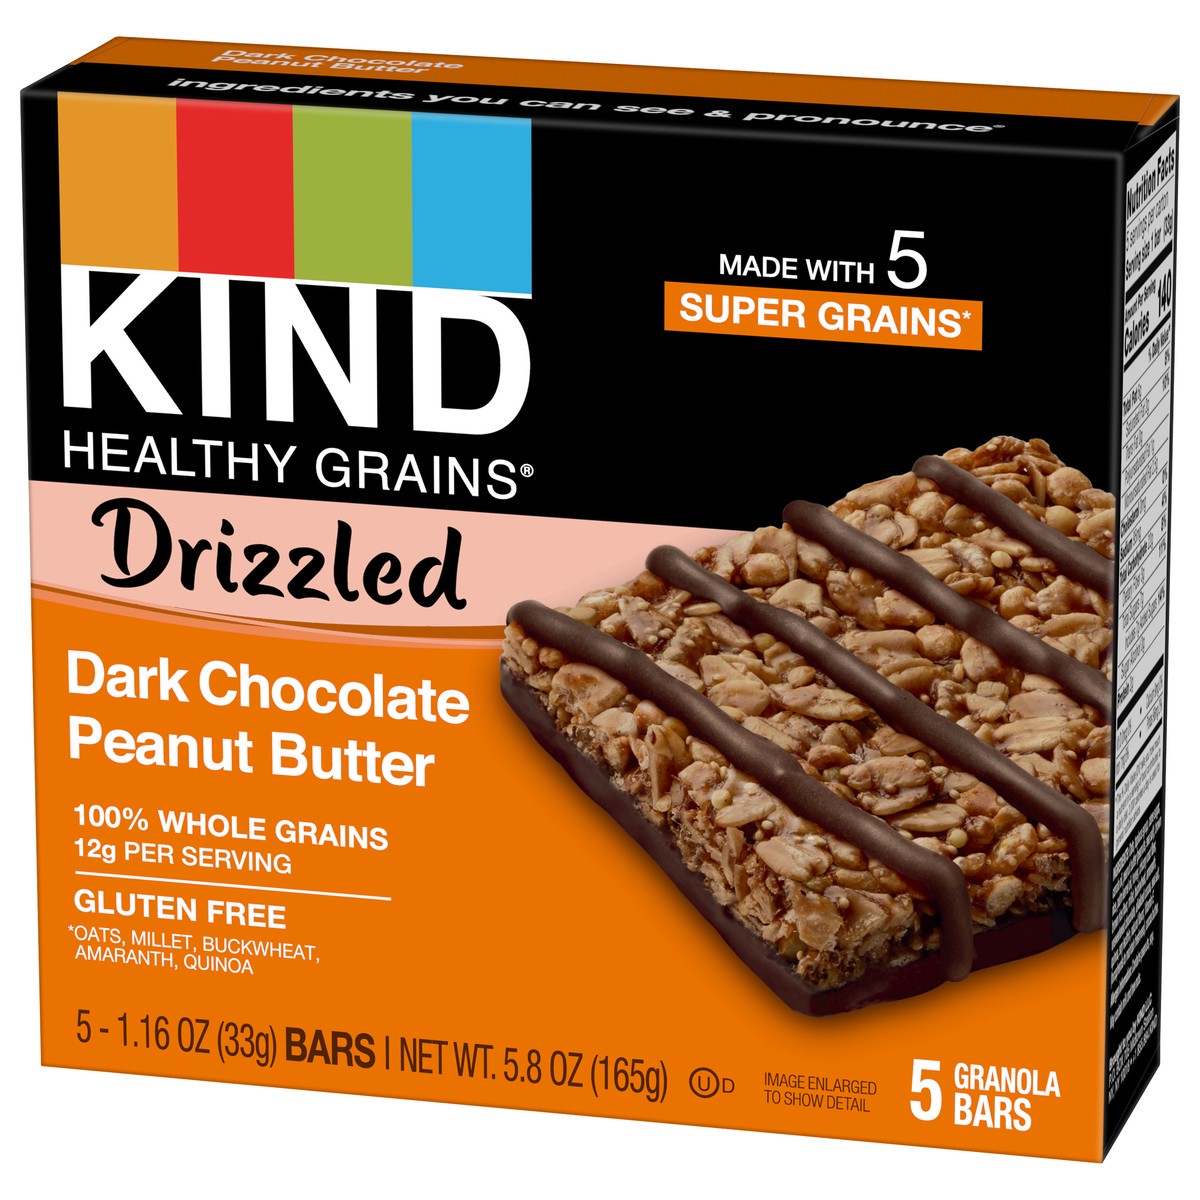 slide 3 of 6, KIND HEALTHY GRAINS Drizzled Dark Chocolate Peanut Butter, Healthy Snack Bar, 12g Whole Grains, Gluten Free Bars, 1.16 OZ Bars (5 Count), 1 ct